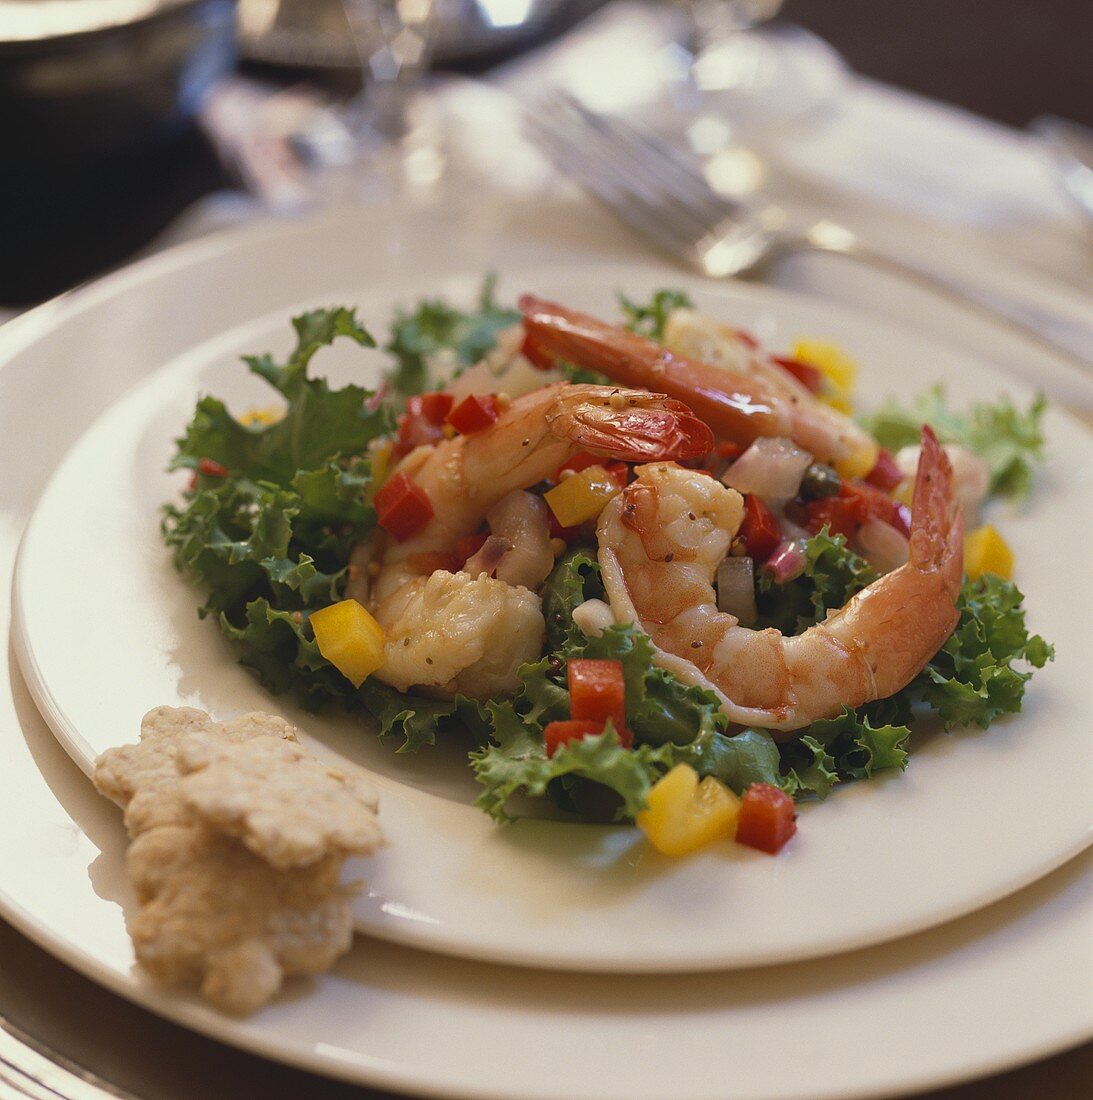 Shrimp Appetizer, Shrimp and Chopped Bell Peppers on Greens